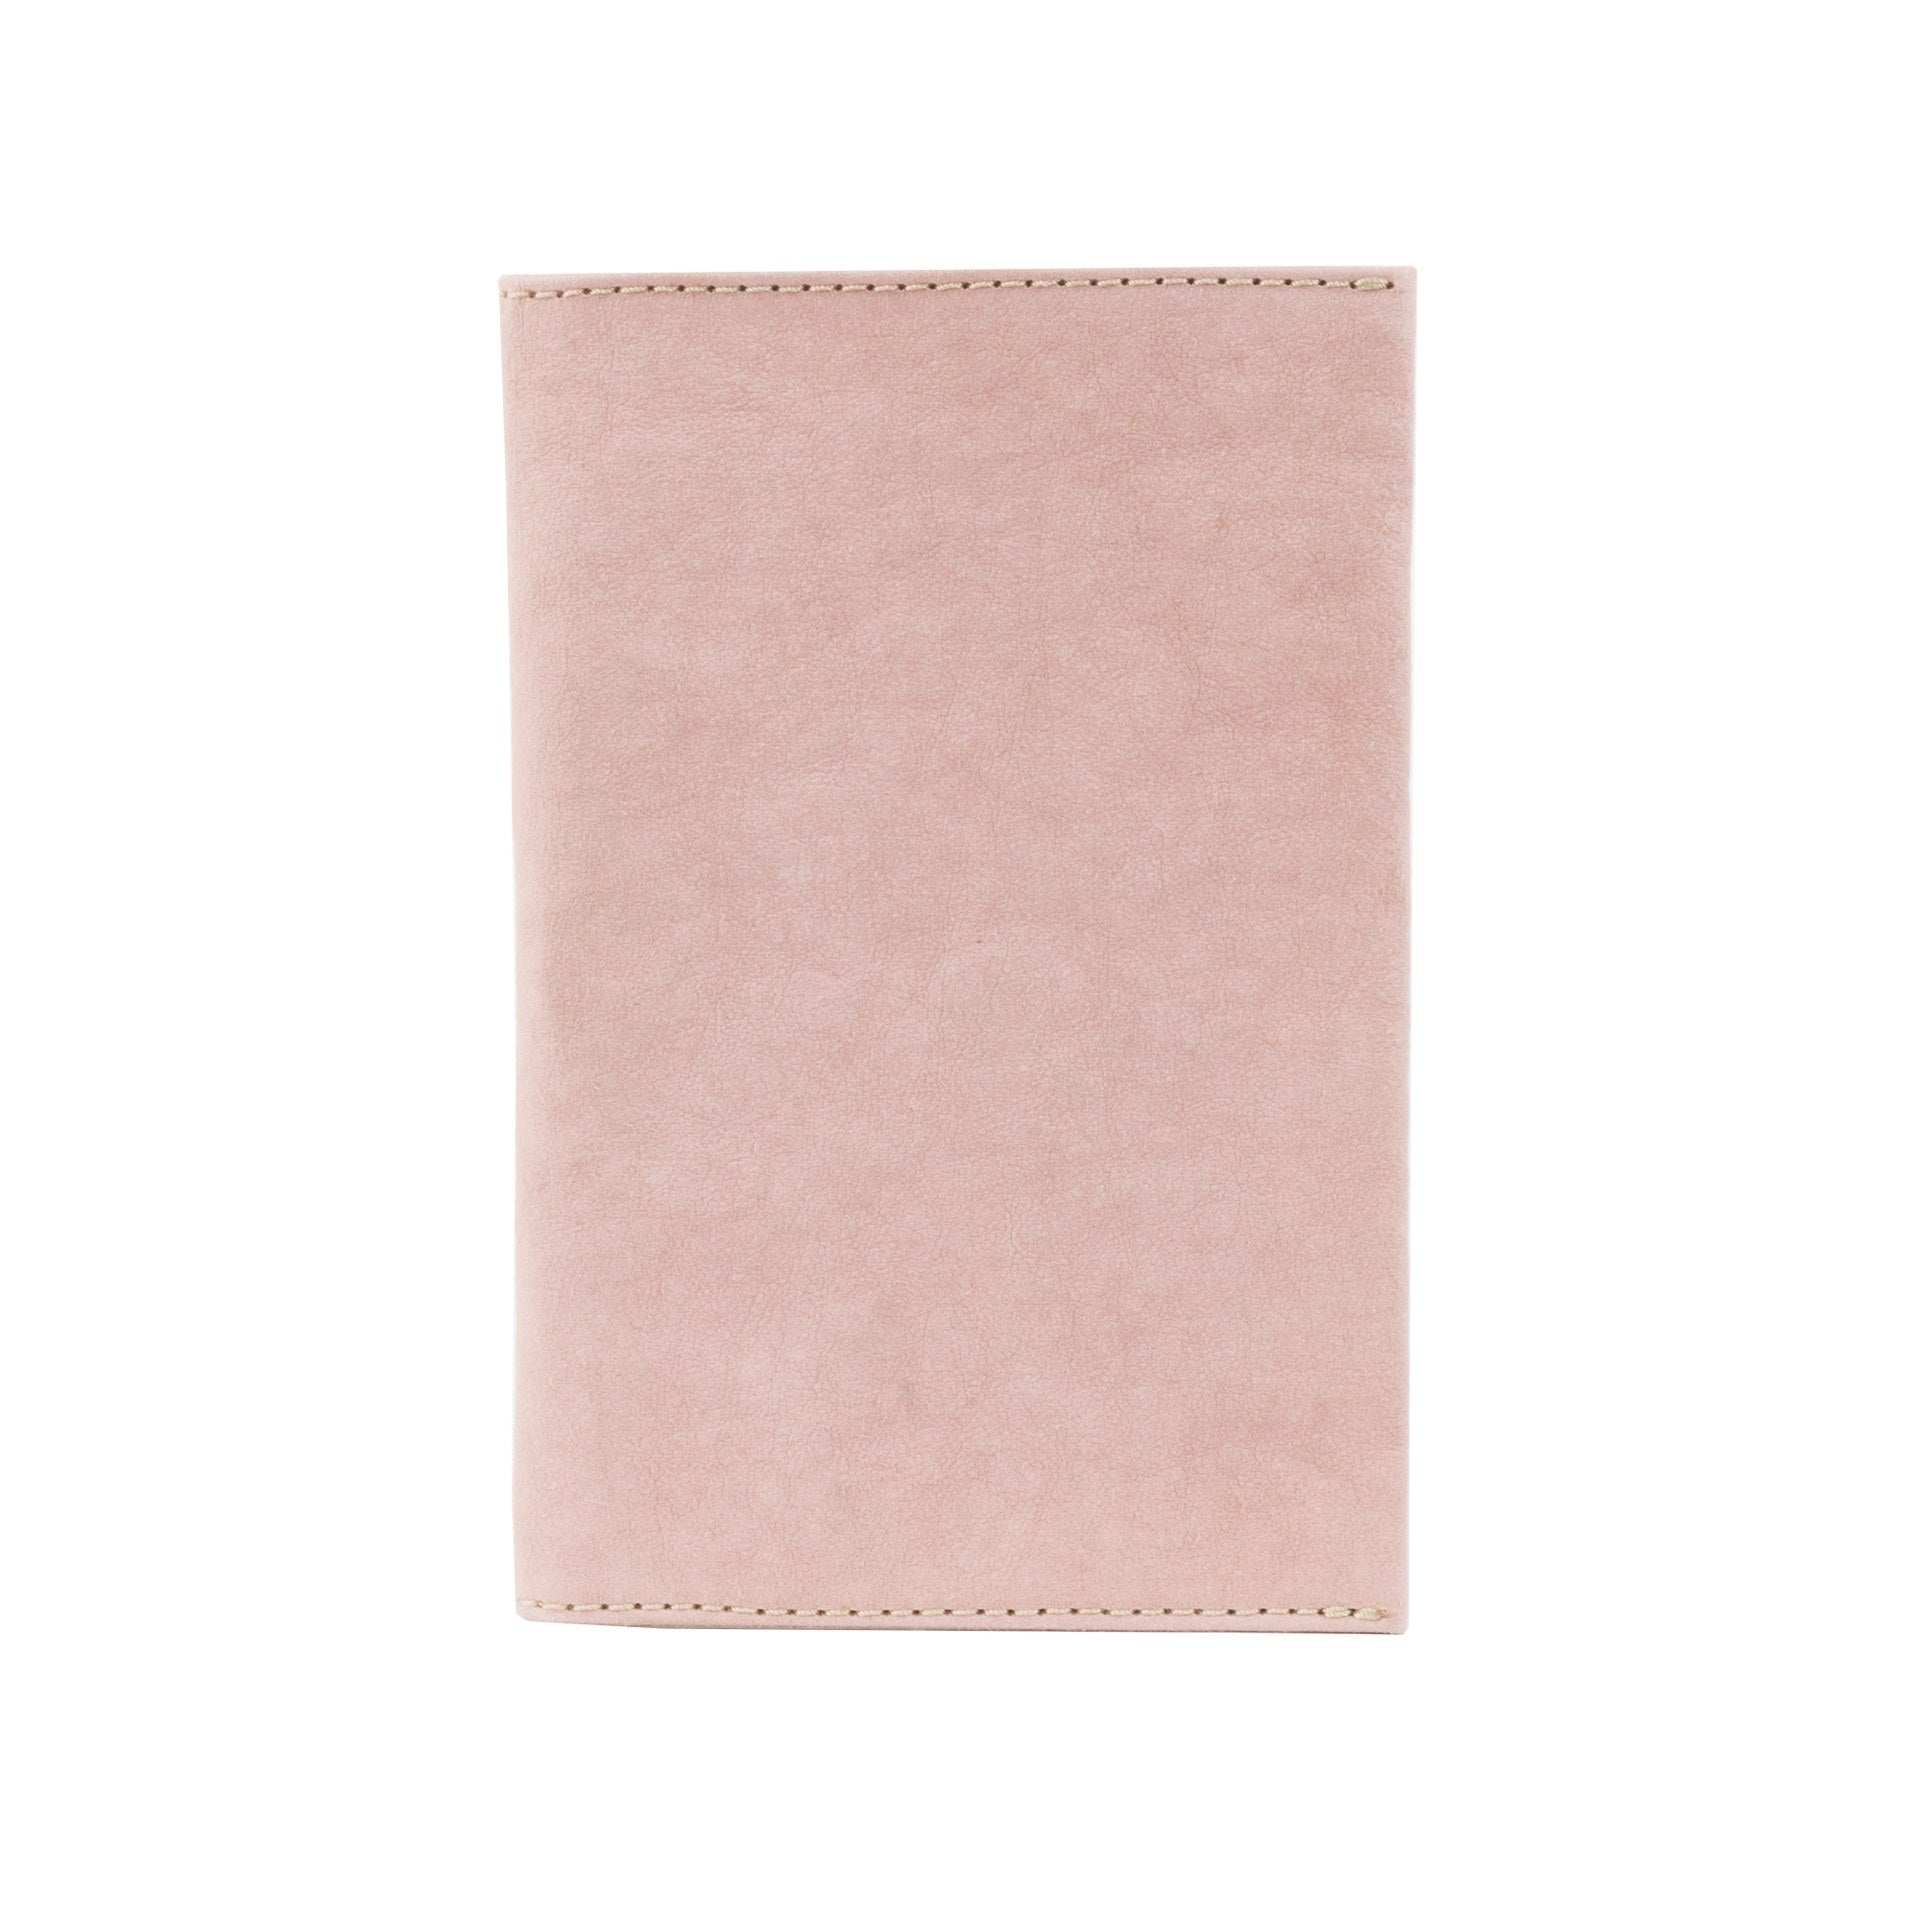 A large washable paper wallet is shown folded closed. The wallet is pale pink.